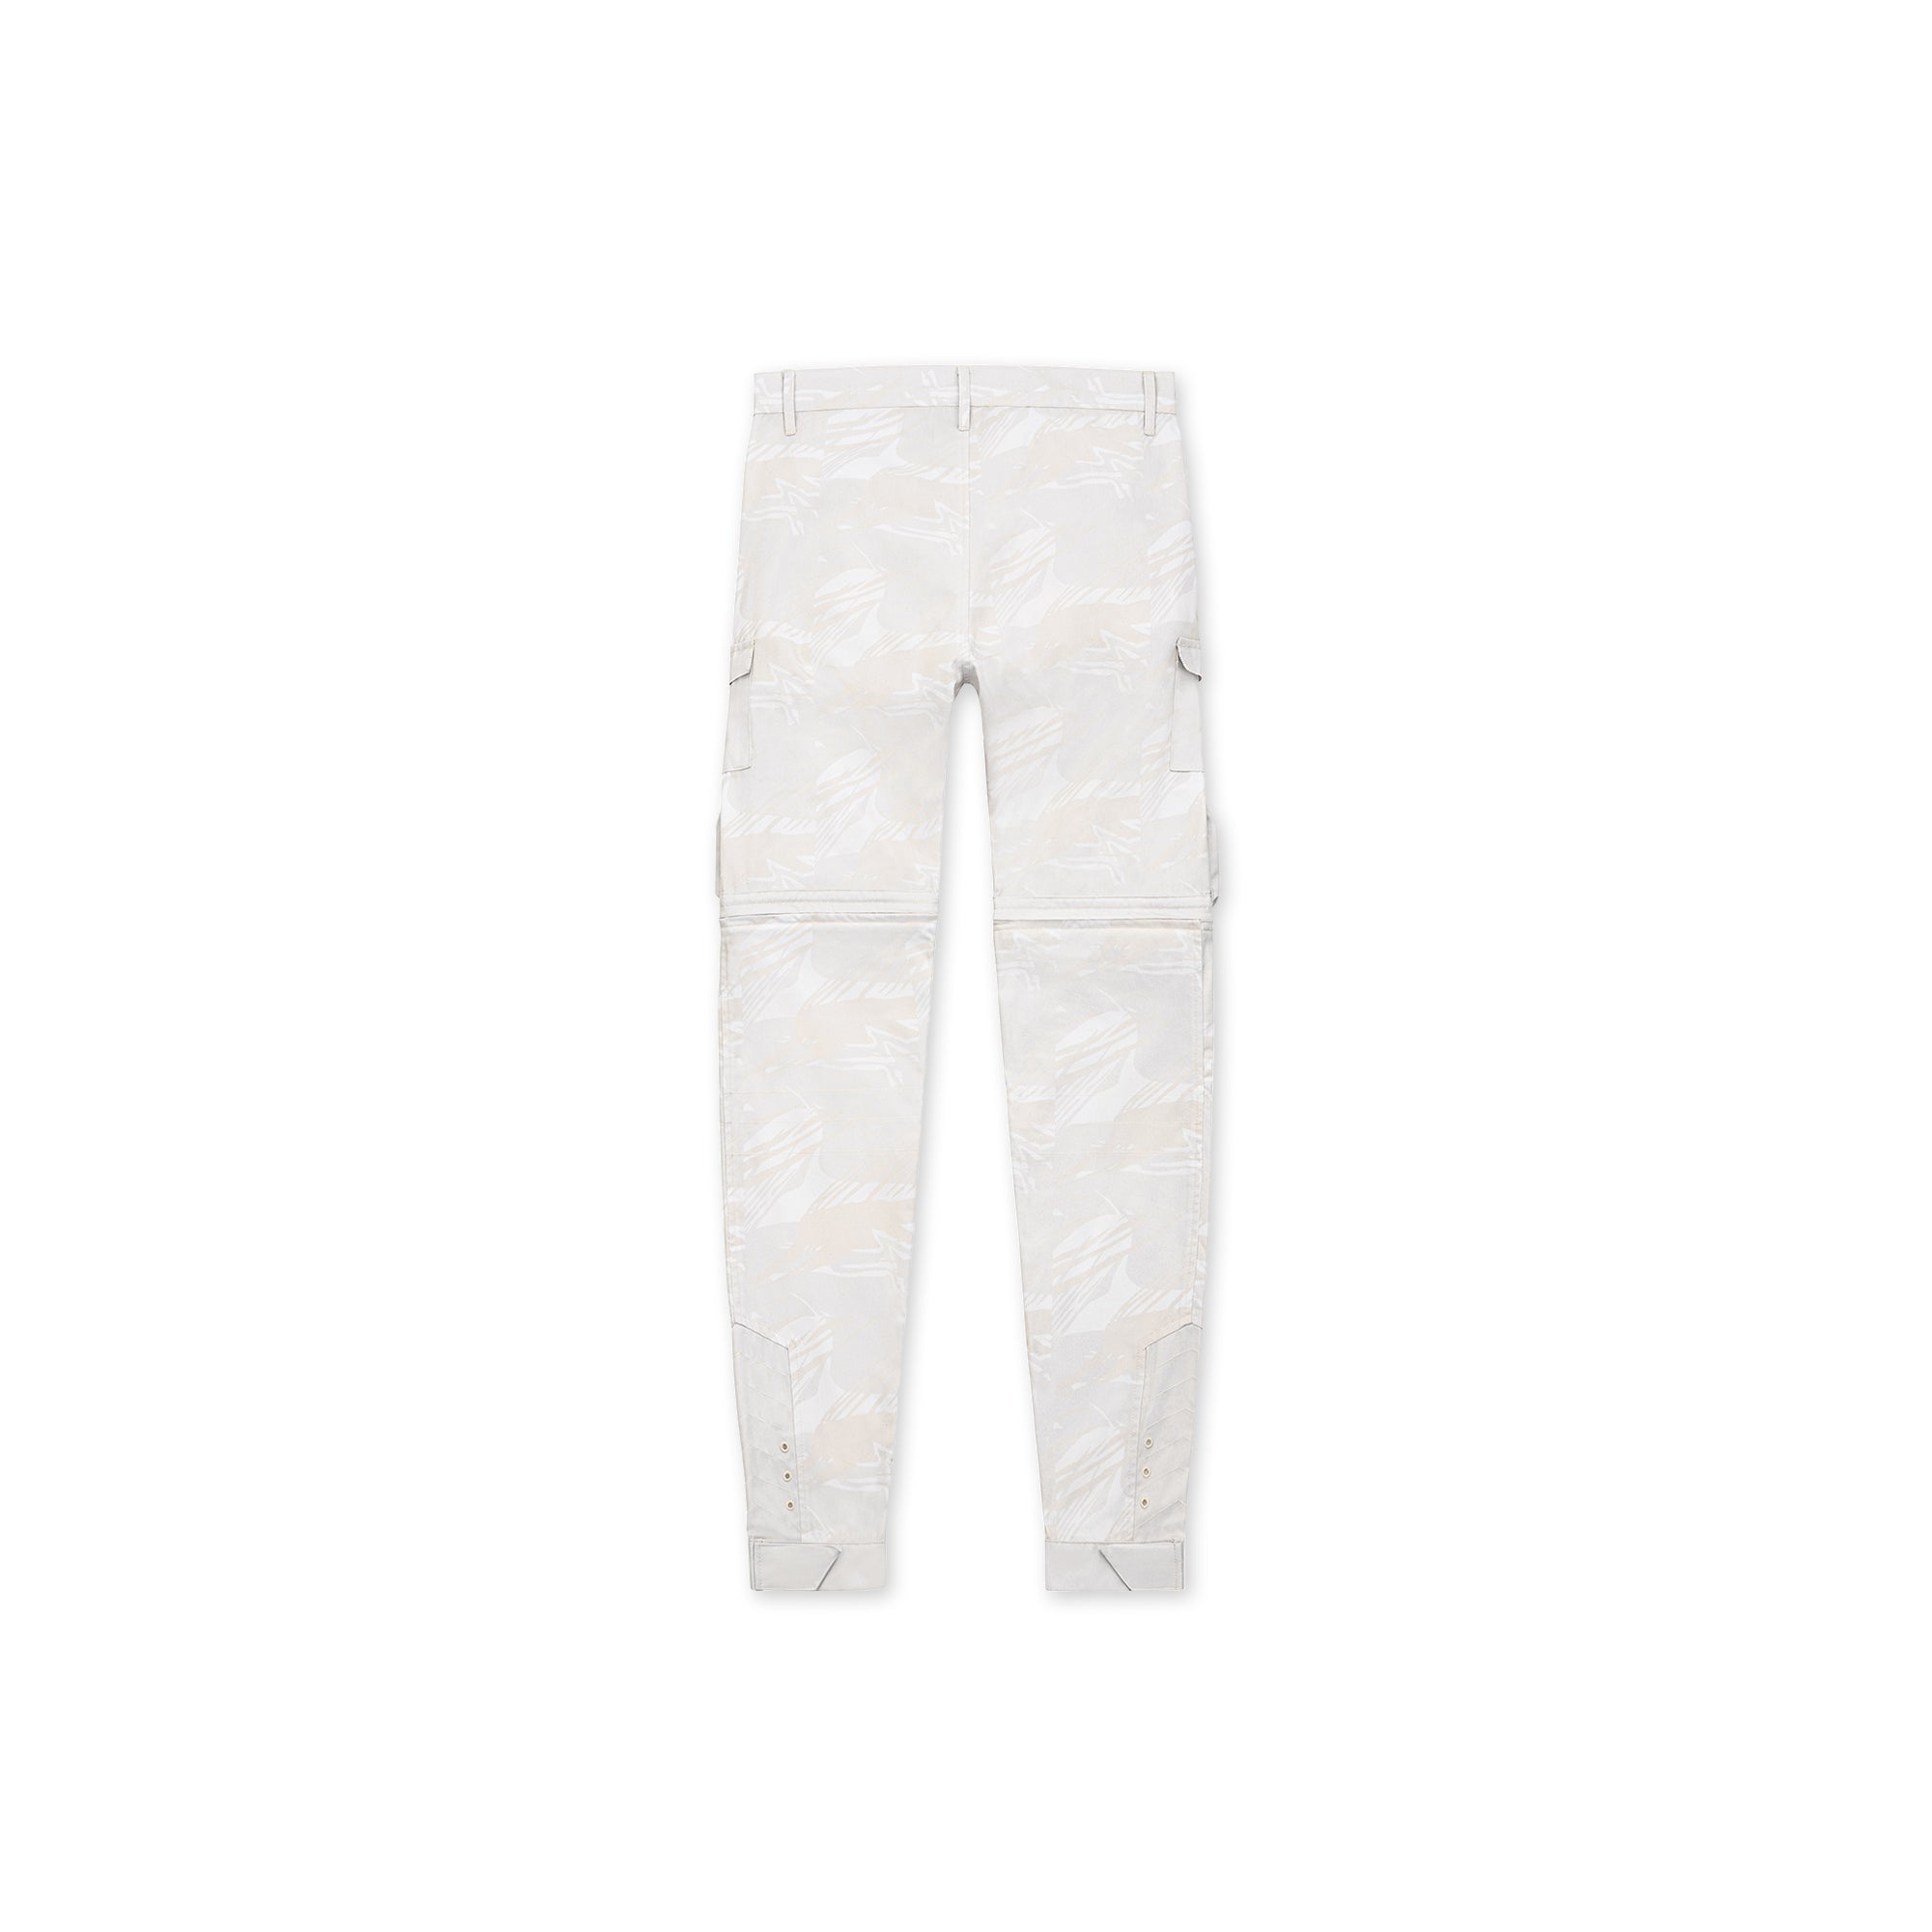 NNB CARGO PANT - ALL OVER PRINT - A3B